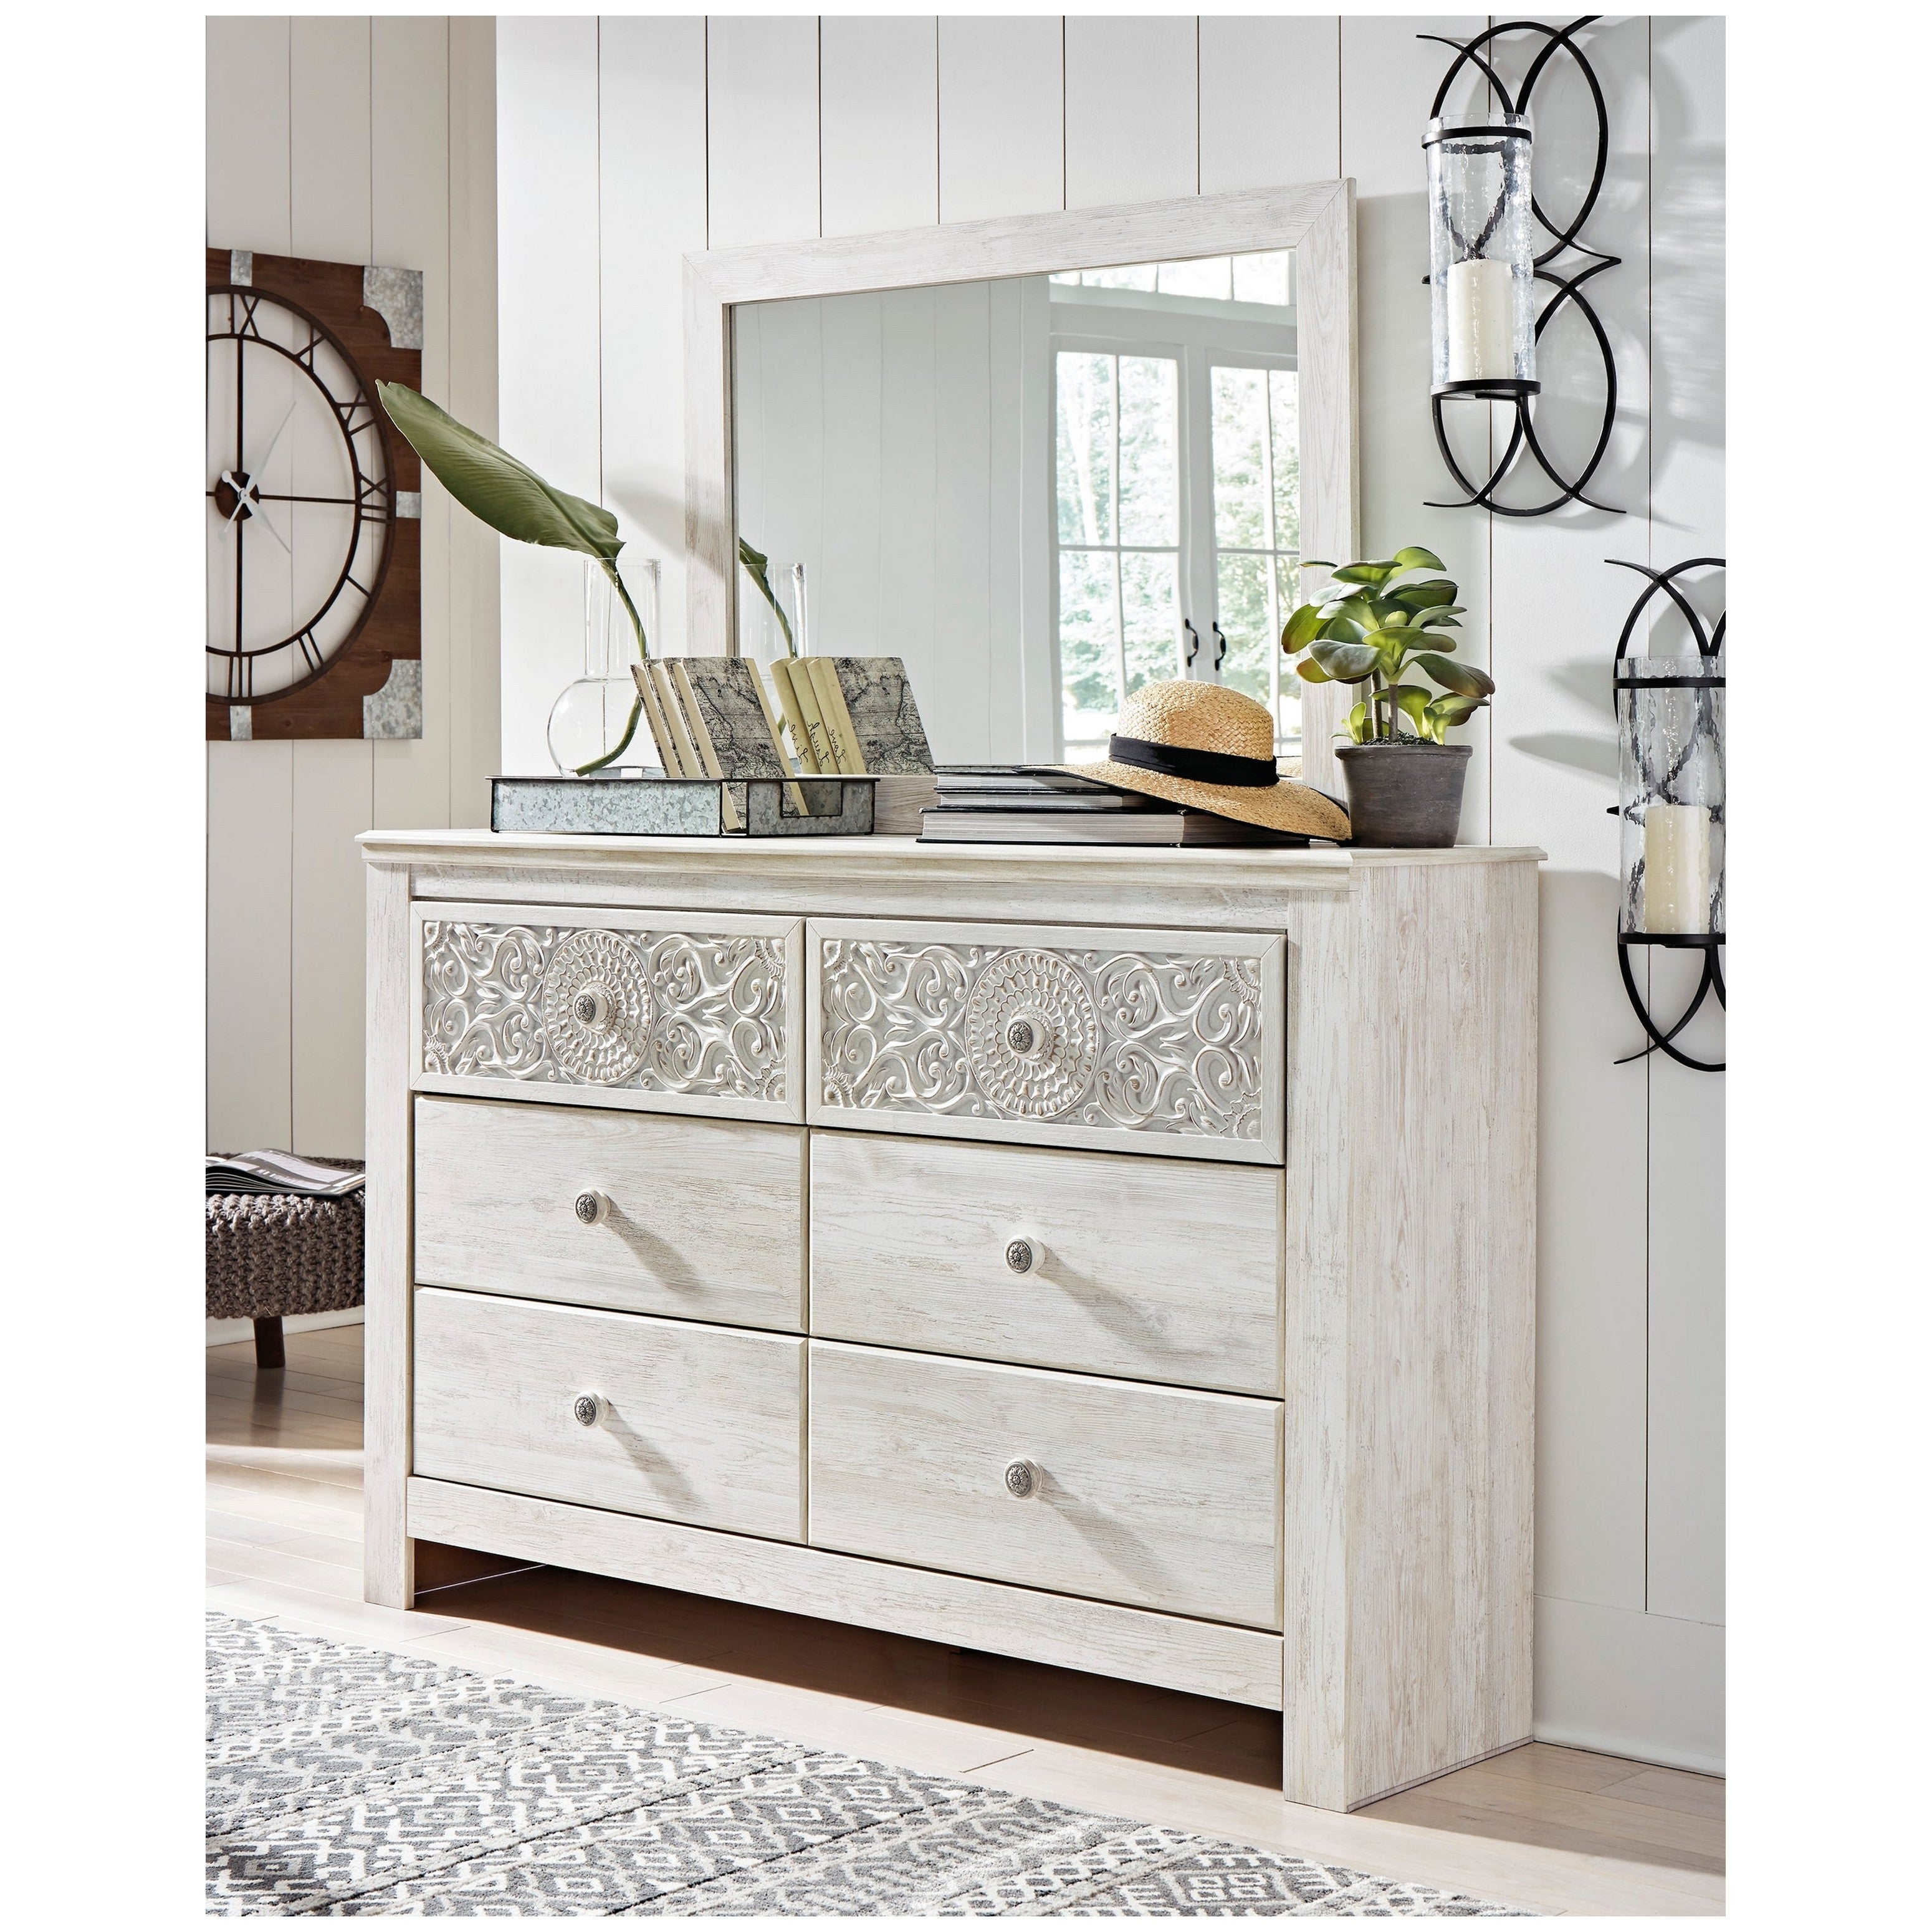 Paxberry Dresser and Mirror Ash-B181B8